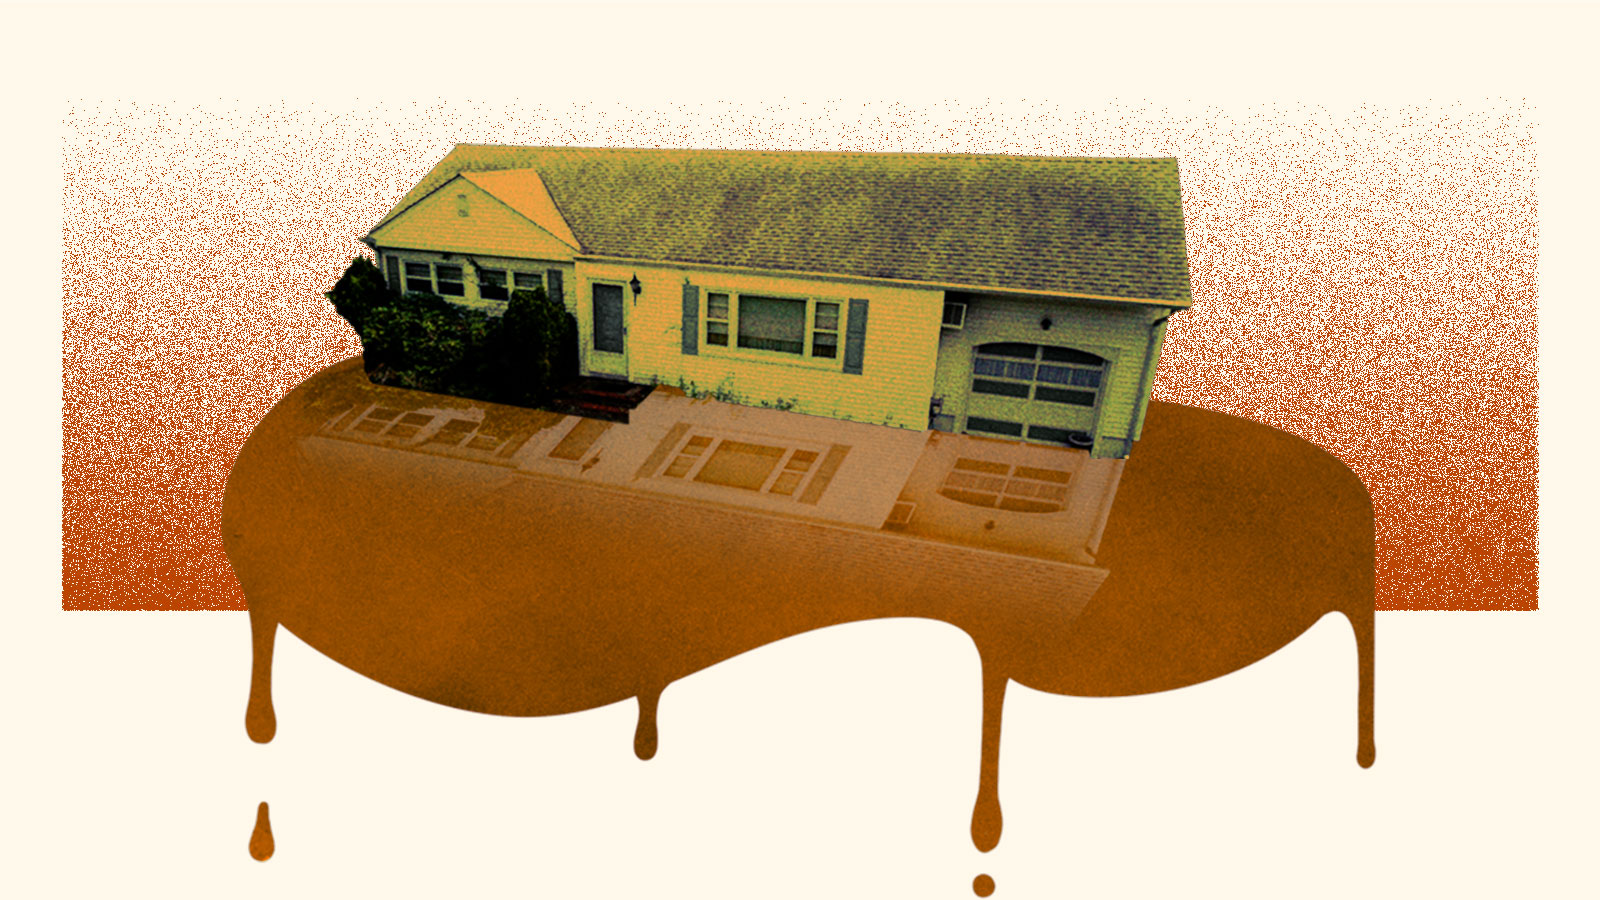 Collage: a ranch style house sitting on top of a leaking brown puddle